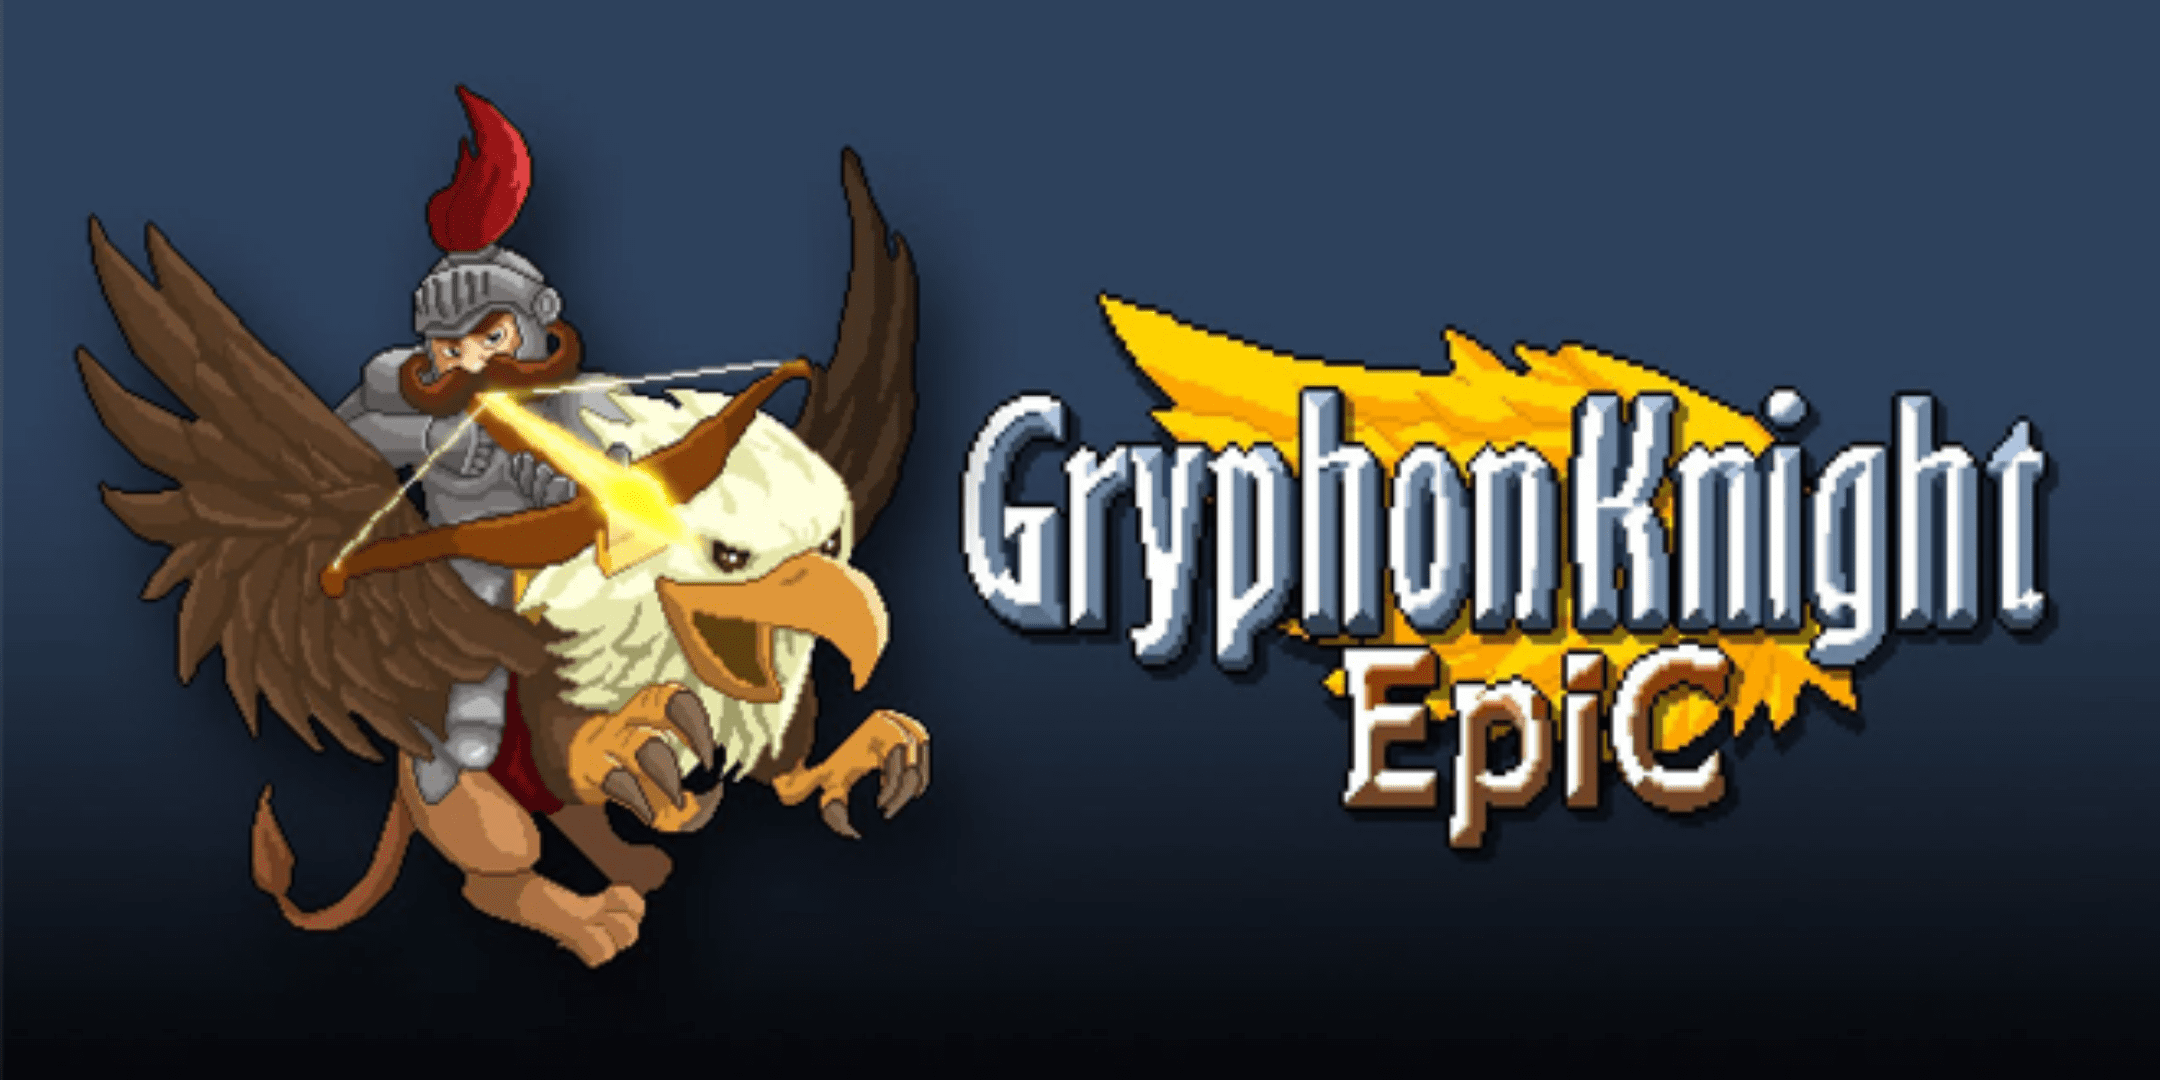 Mount Up With Gryphon Knight, Coming Soon To Consoles